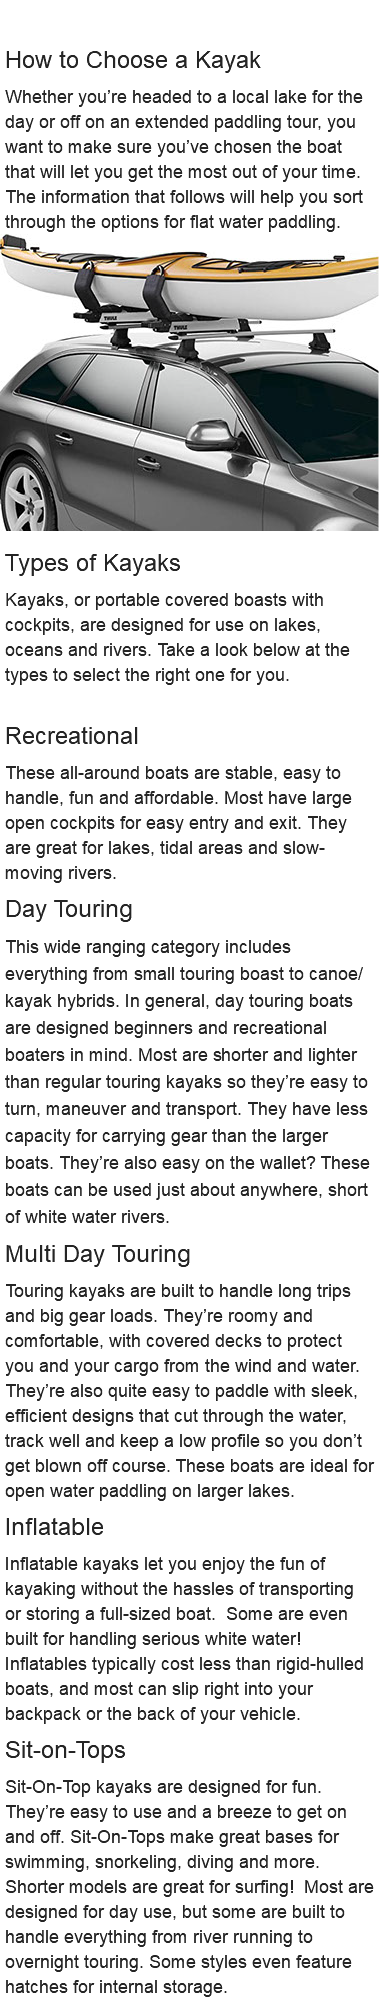  How to Choose a Kayak Whether you’re headed to a local lake for the day or off on an extended paddling tour, you want to make sure you’ve chosen the boat that will let you get the most out of your time. The information that follows will help you sort through the options for flat water paddling. ﷯ Types of Kayaks Kayaks, or portable covered boasts with cockpits, are designed for use on lakes, oceans and rivers. Take a look below at the types to select the right one for you. Recreational These all-around boats are stable, easy to handle, fun and affordable. Most have large open cockpits for easy entry and exit. They are great for lakes, tidal areas and slow-moving rivers. Day Touring This wide ranging category includes everything from small touring boast to canoe/kayak hybrids. In general, day touring boats are designed beginners and recreational boaters in mind. Most are shorter and lighter than regular touring kayaks so they’re easy to turn, maneuver and transport. They have less capacity for carrying gear than the larger boats. They’re also easy on the wallet? These boats can be used just about anywhere, short of white water rivers. Multi Day Touring Touring kayaks are built to handle long trips and big gear loads. They’re roomy and comfortable, with covered decks to protect you and your cargo from the wind and water. They’re also quite easy to paddle with sleek, efficient designs that cut through the water, track well and keep a low profile so you don’t get blown off course. These boats are ideal for open water paddling on larger lakes. Inflatable Inflatable kayaks let you enjoy the fun of kayaking without the hassles of transporting or storing a full-sized boat. Some are even built for handling serious white water! Inflatables typically cost less than rigid-hulled boats, and most can slip right into your backpack or the back of your vehicle. Sit-on-Tops Sit-On-Top kayaks are designed for fun. They’re easy to use and a breeze to get on and off. Sit-On-Tops make great bases for swimming, snorkeling, diving and more. Shorter models are great for surfing! Most are designed for day use, but some are built to handle everything from river running to overnight touring. Some styles even feature hatches for internal storage.